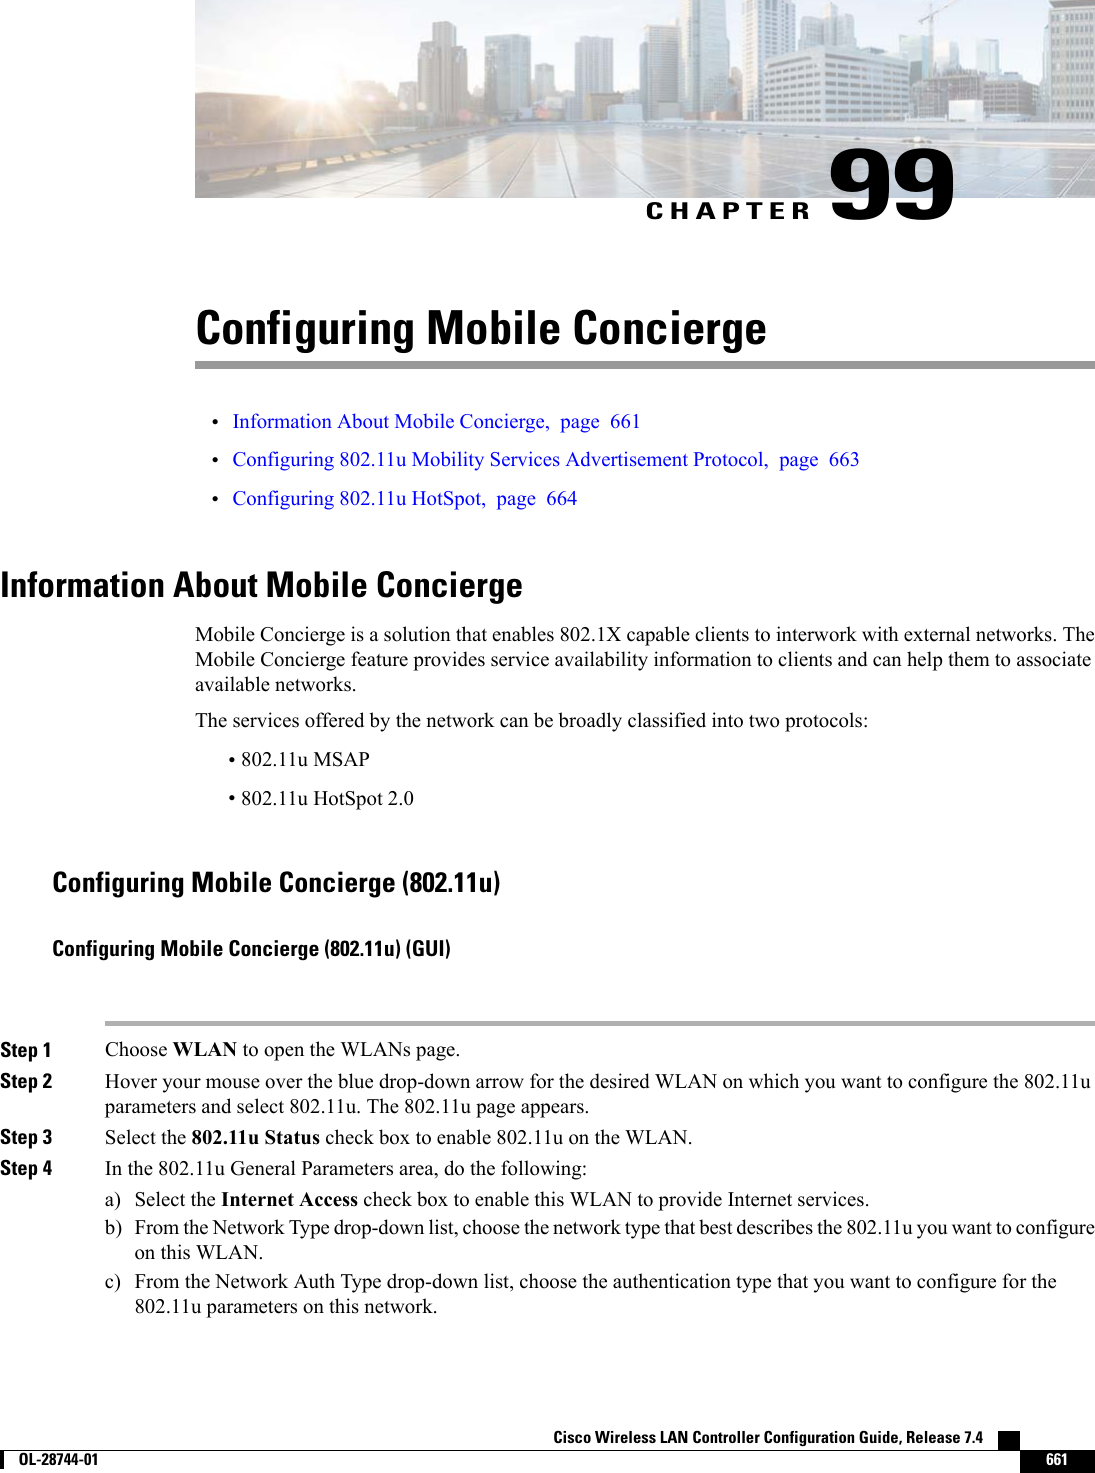 CHAPTER 99Configuring Mobile Concierge•Information About Mobile Concierge, page 661•Configuring 802.11u Mobility Services Advertisement Protocol, page 663•Configuring 802.11u HotSpot, page 664Information About Mobile ConciergeMobile Concierge is a solution that enables 802.1X capable clients to interwork with external networks. TheMobile Concierge feature provides service availability information to clients and can help them to associateavailable networks.The services offered by the network can be broadly classified into two protocols:•802.11u MSAP•802.11u HotSpot 2.0Configuring Mobile Concierge (802.11u)Configuring Mobile Concierge (802.11u) (GUI)Step 1 Choose WLAN to open the WLANs page.Step 2 Hover your mouse over the blue drop-down arrow for the desired WLAN on which you want to configure the 802.11uparameters and select 802.11u. The 802.11u page appears.Step 3 Select the 802.11u Status check box to enable 802.11u on the WLAN.Step 4 In the 802.11u General Parameters area, do the following:a) Select the Internet Access check box to enable this WLAN to provide Internet services.b) From the Network Type drop-down list, choose the network type that best describes the 802.11u you want to configureon this WLAN.c) From the Network Auth Type drop-down list, choose the authentication type that you want to configure for the802.11u parameters on this network.Cisco Wireless LAN Controller Configuration Guide, Release 7.4        OL-28744-01 661